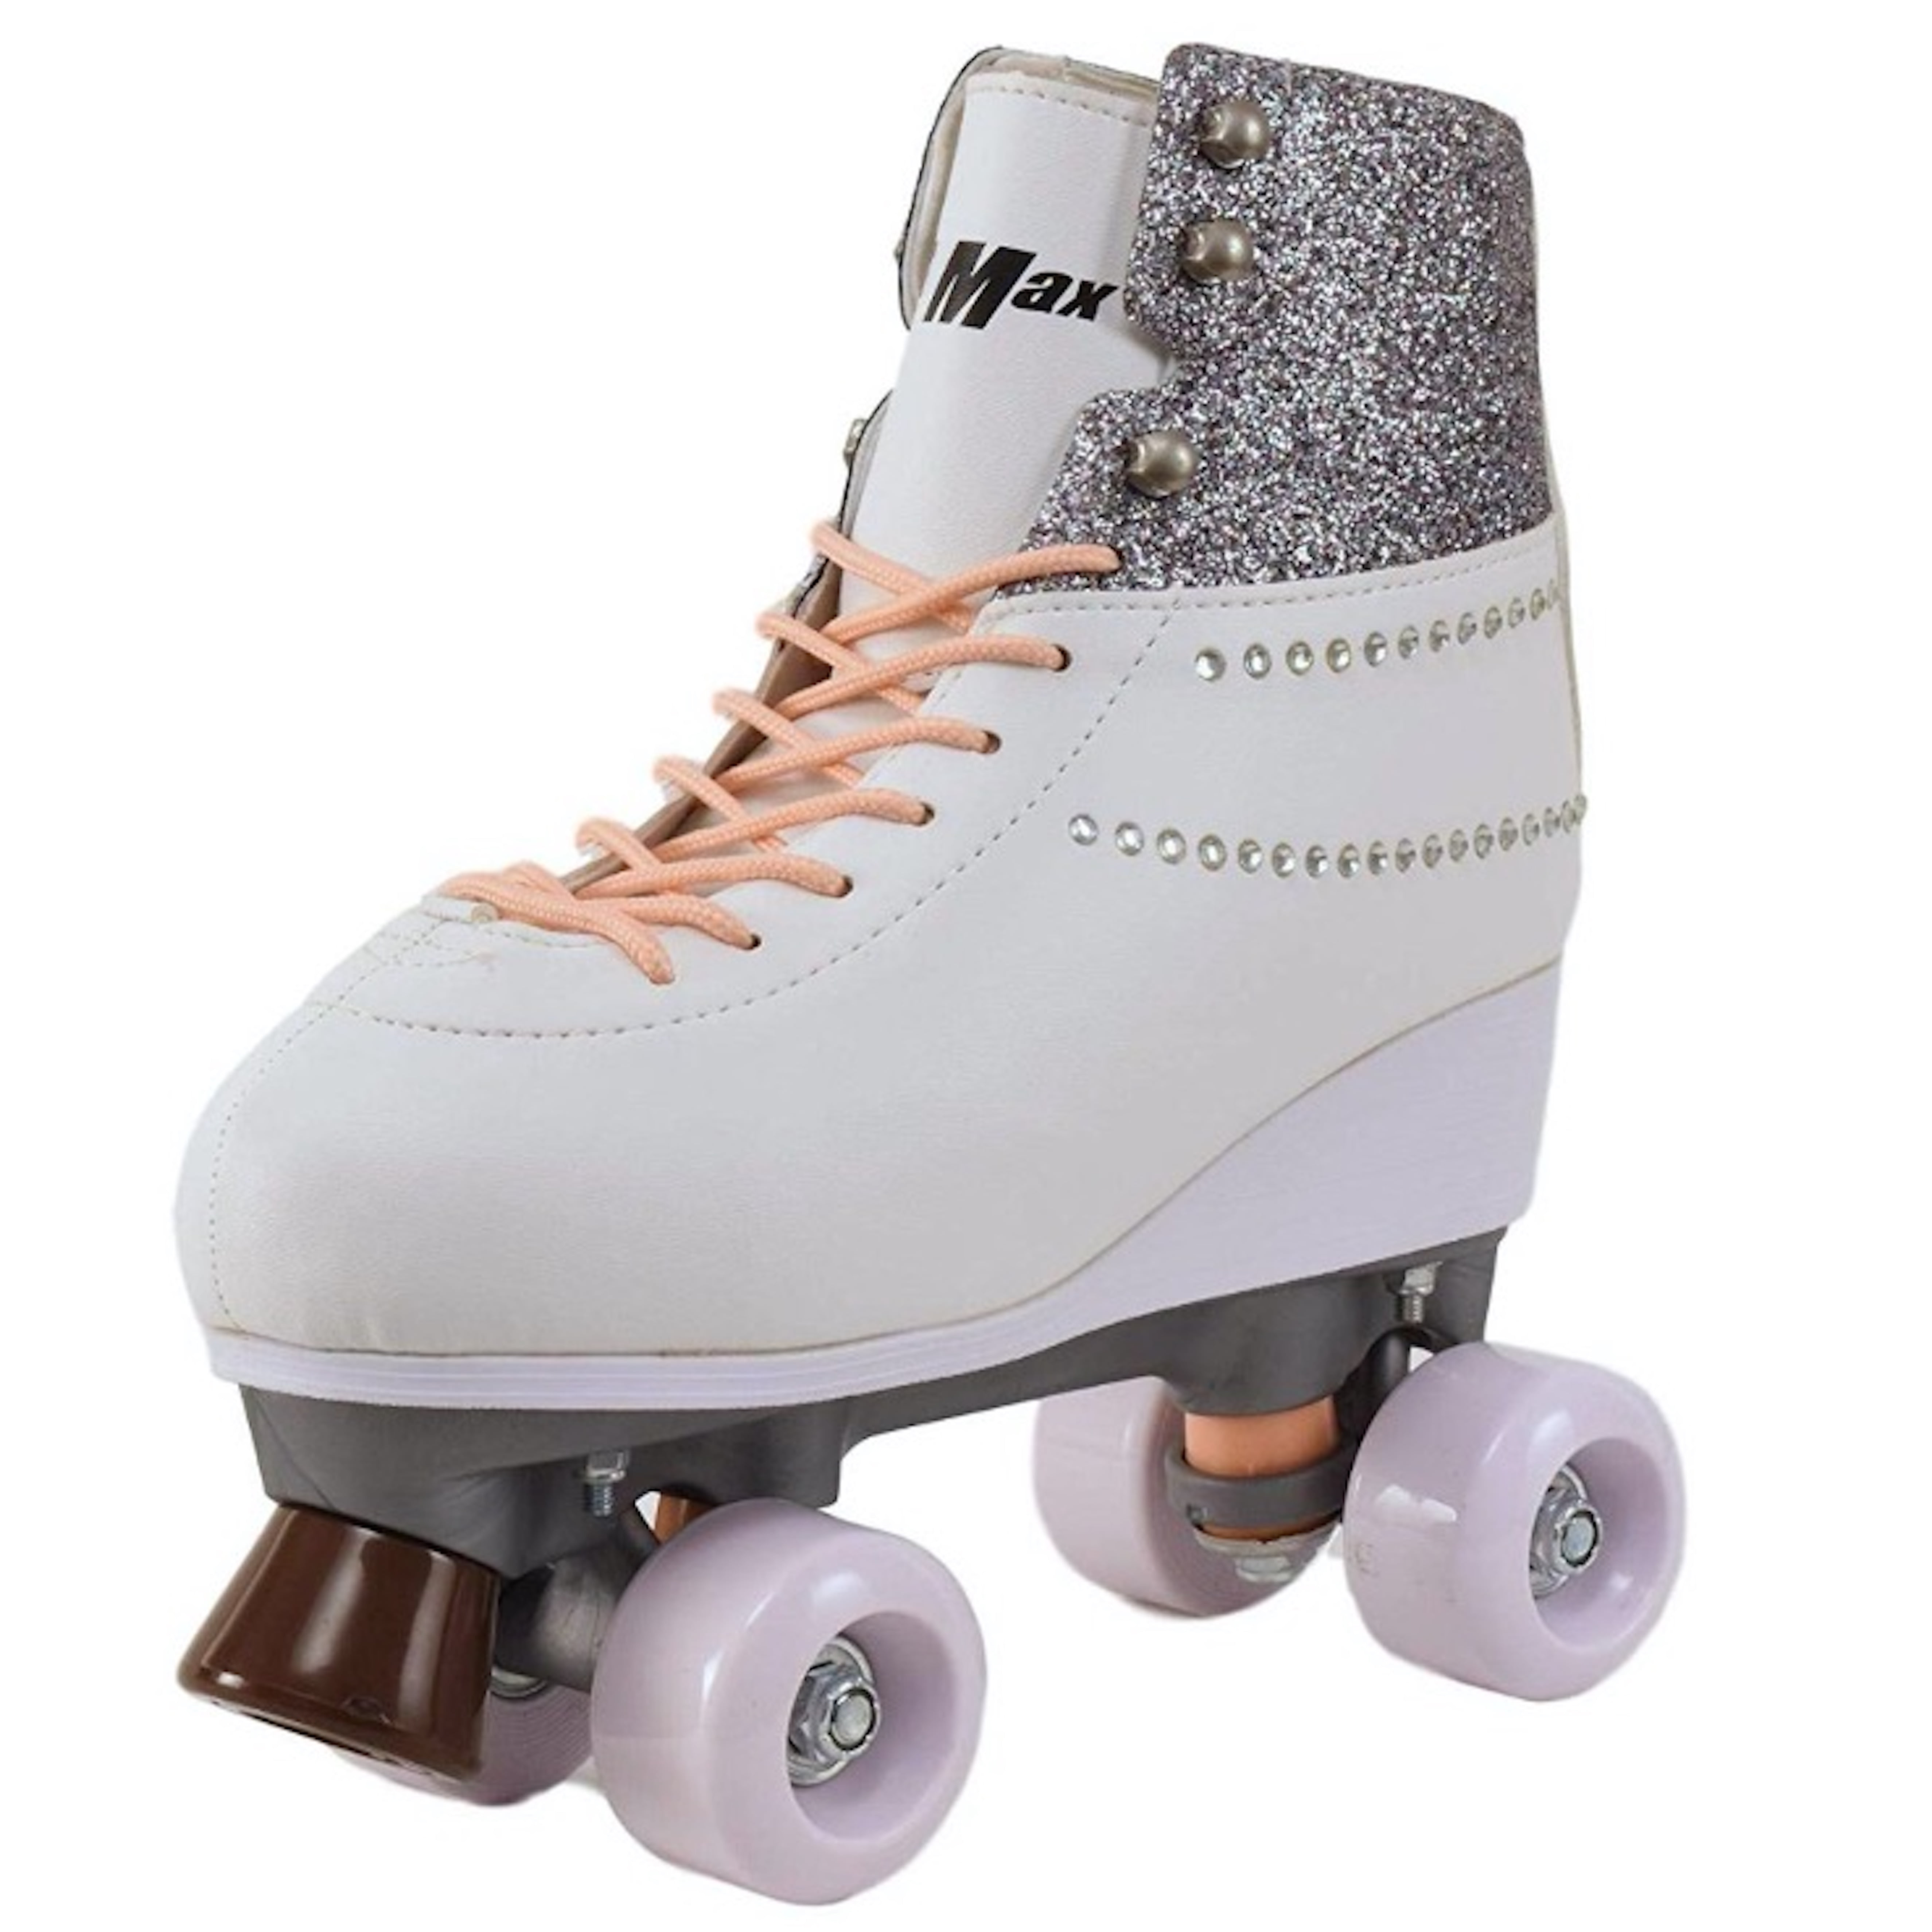 Roller Skates Women Outdoor,Indoor Outdoor Roller Skates for Teens and Youth,Adjustable Double Row Unisex Roller Skate White by Bosmy